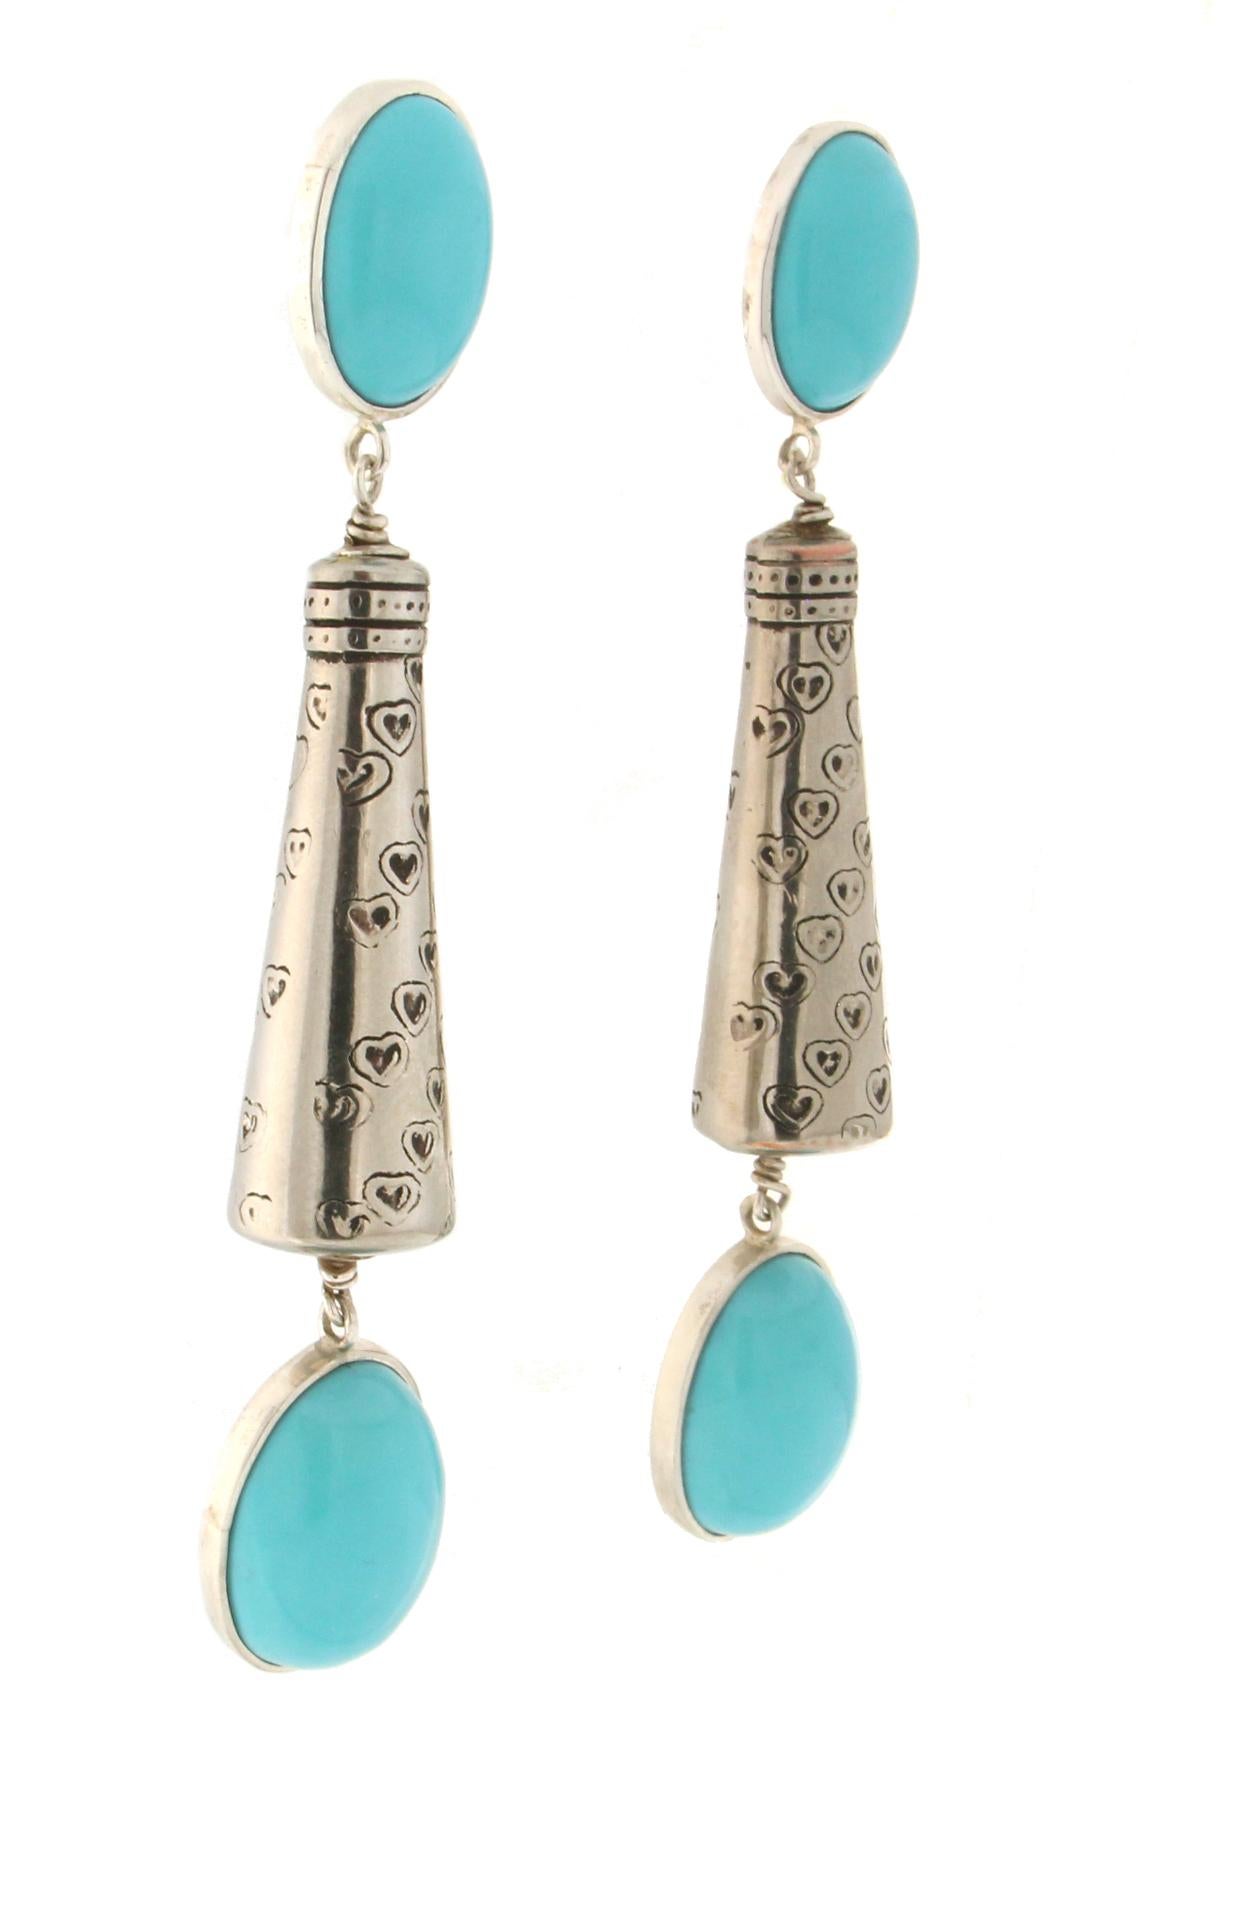 Artisan Handcraft Turquoise Paste 800 Thousandths Silver Drop Earrings For Sale